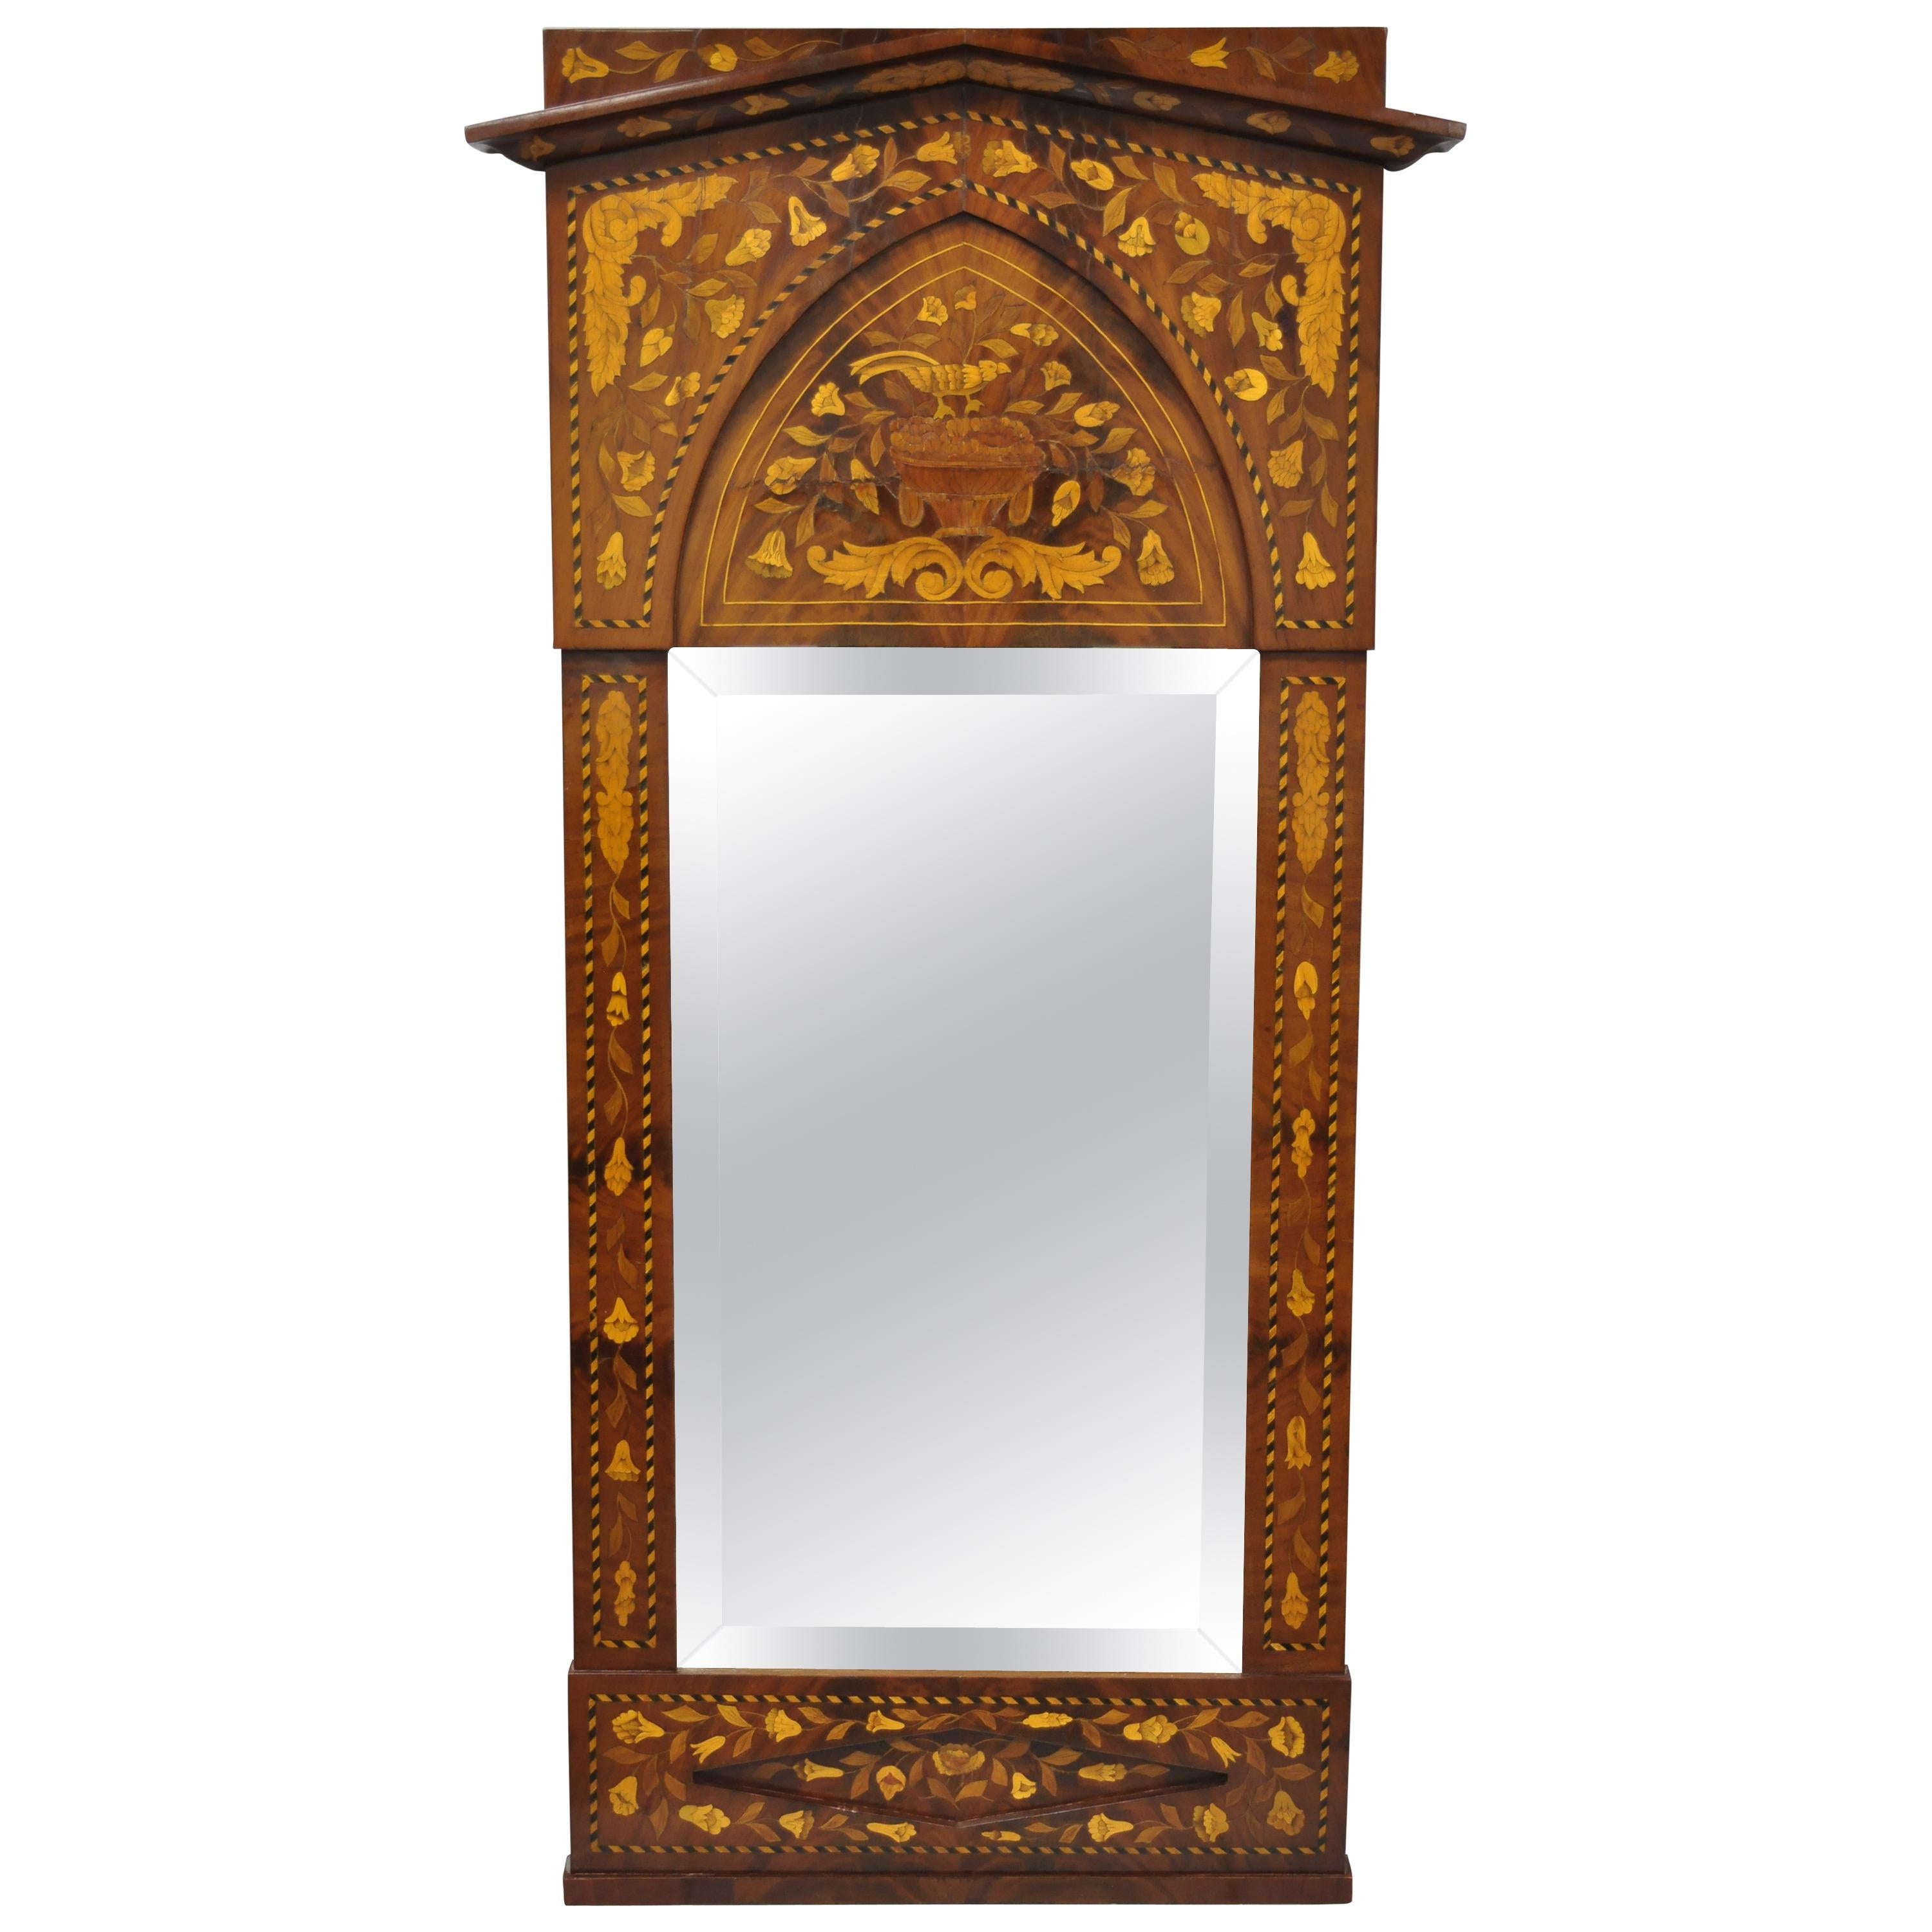 19th Century Satinwood Dutch Marquetry Inlaid Beveled Glass Console Wall Mirror